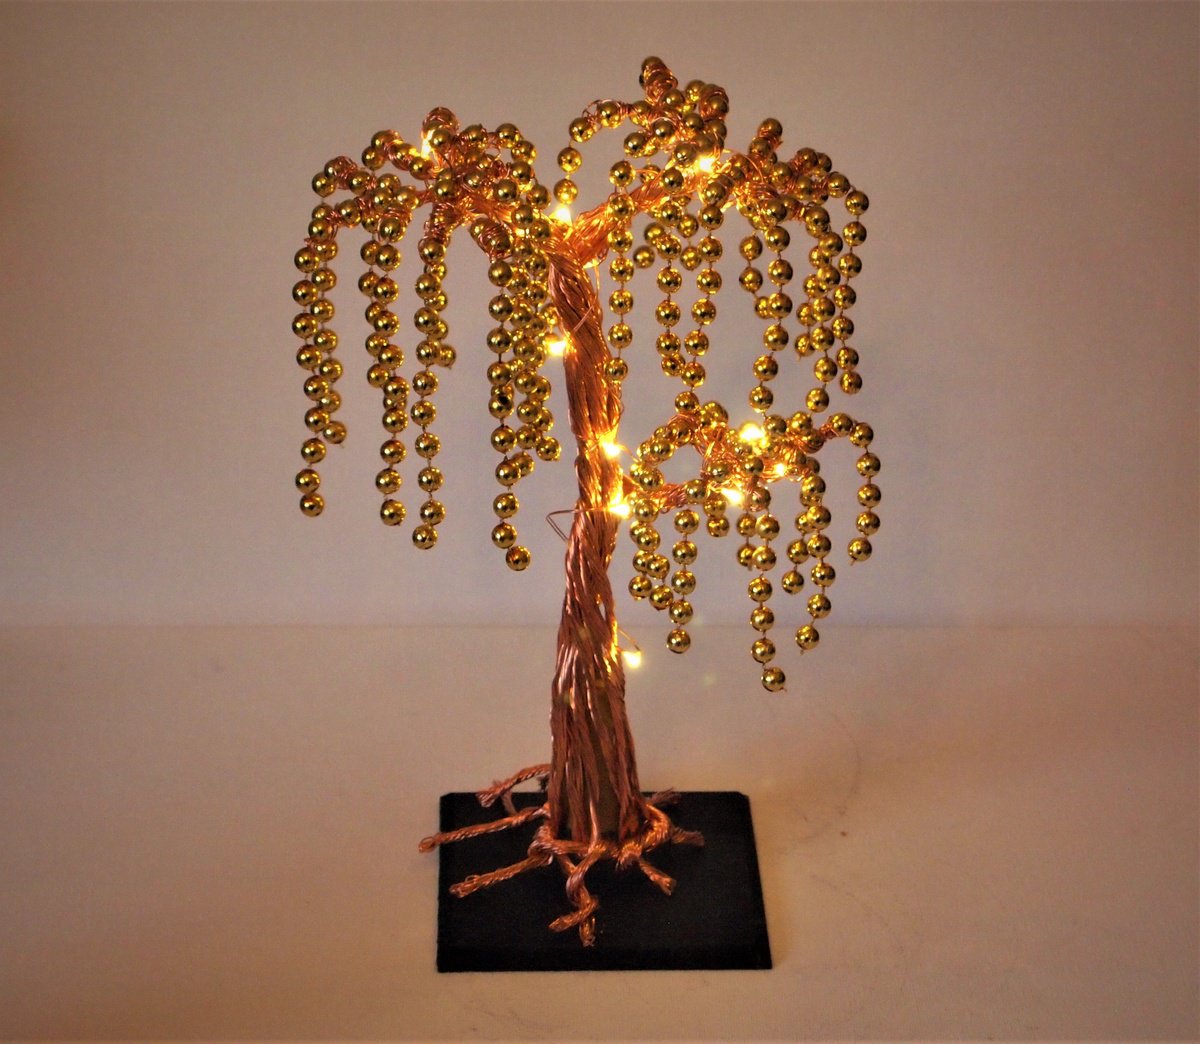 Copper wire tree sculpture with Beads and Warm white LED lights by Steph Morgan